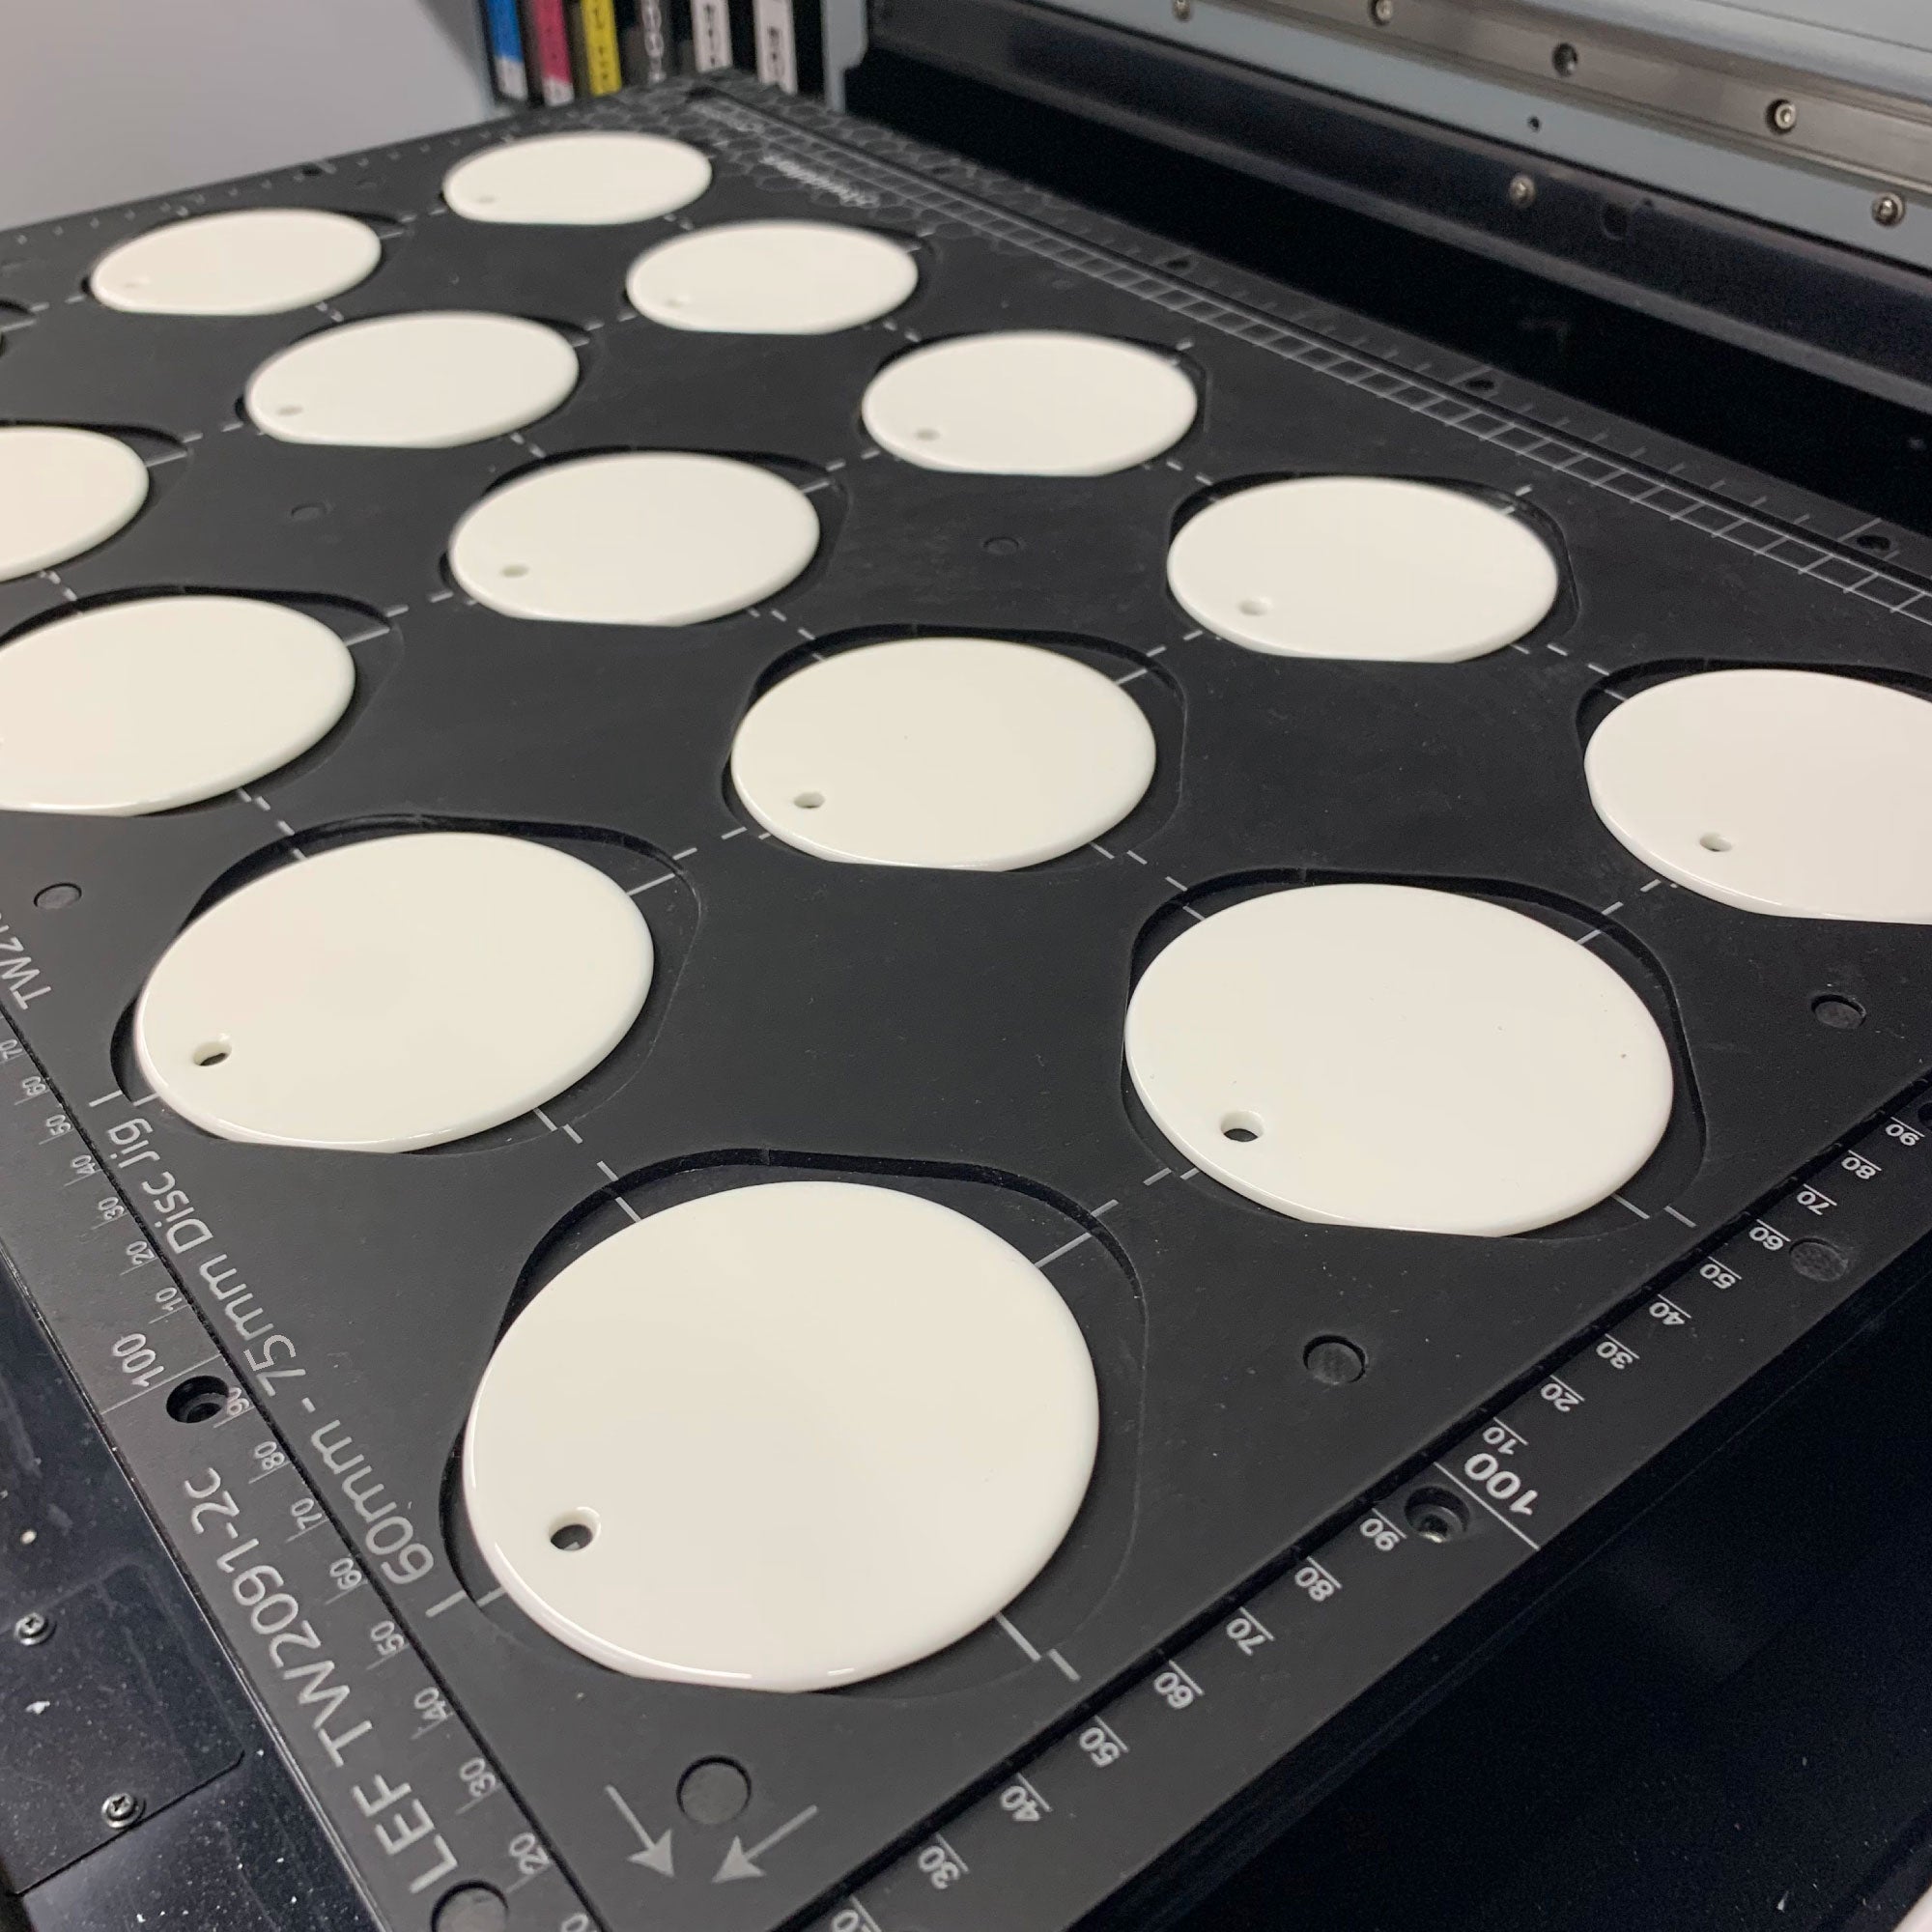 Ceramic Christmas Bauble Printing Jig for Mimaki UJF-3042 Flatbed Printer: 60mm - 77mm Circular Discs (12 Spaces)